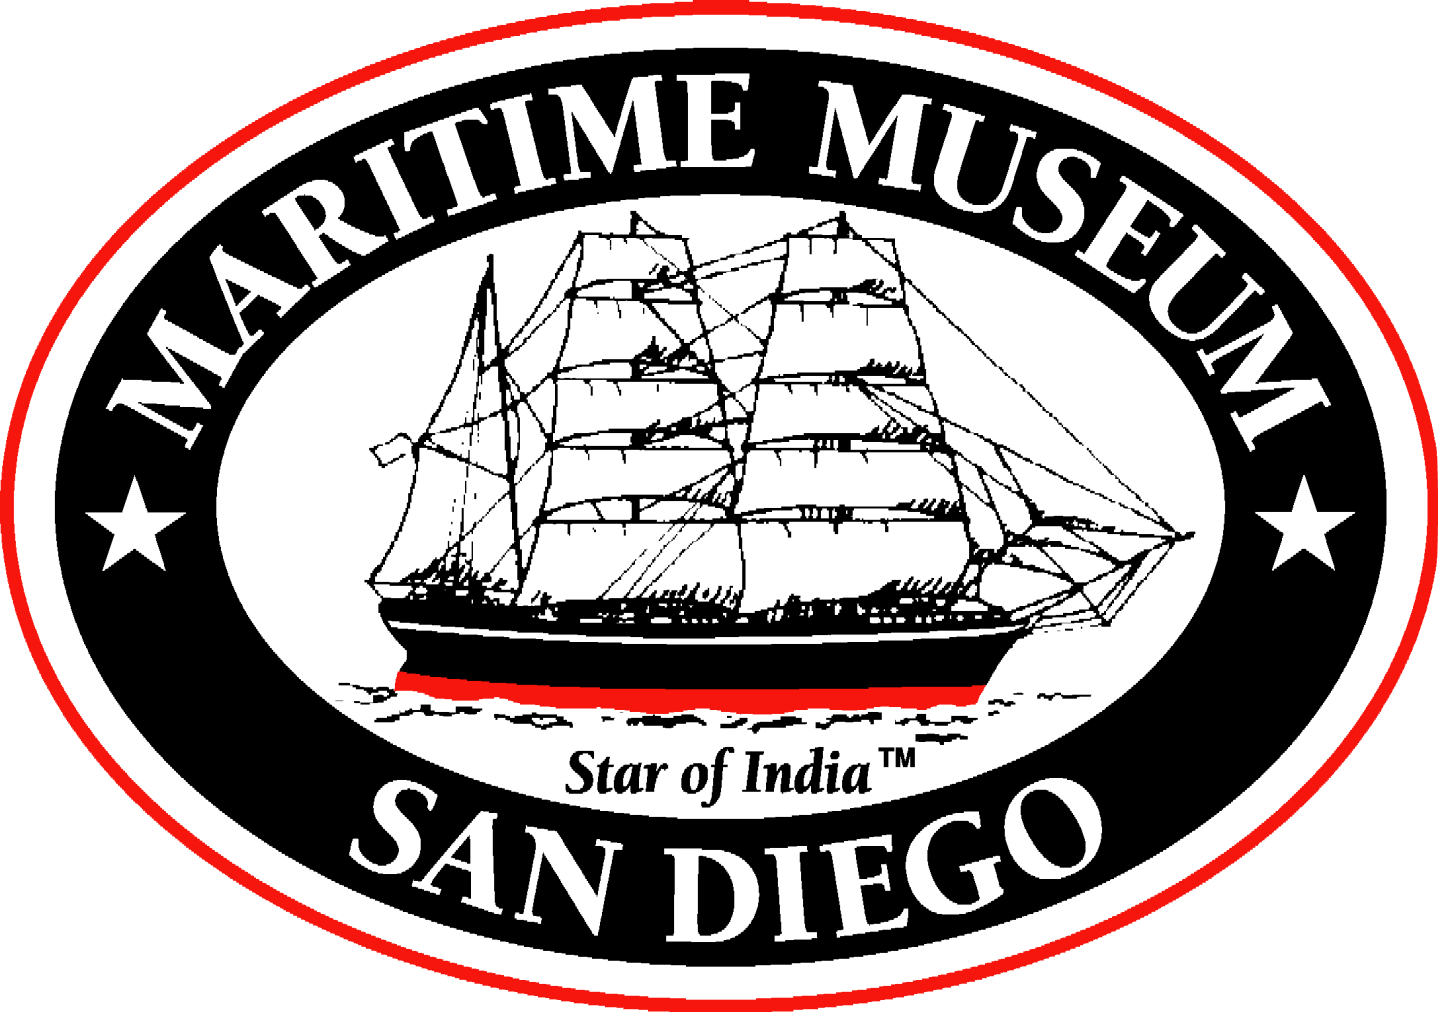 Maritime Museum of San Diego logo with Star of India tall ship at center